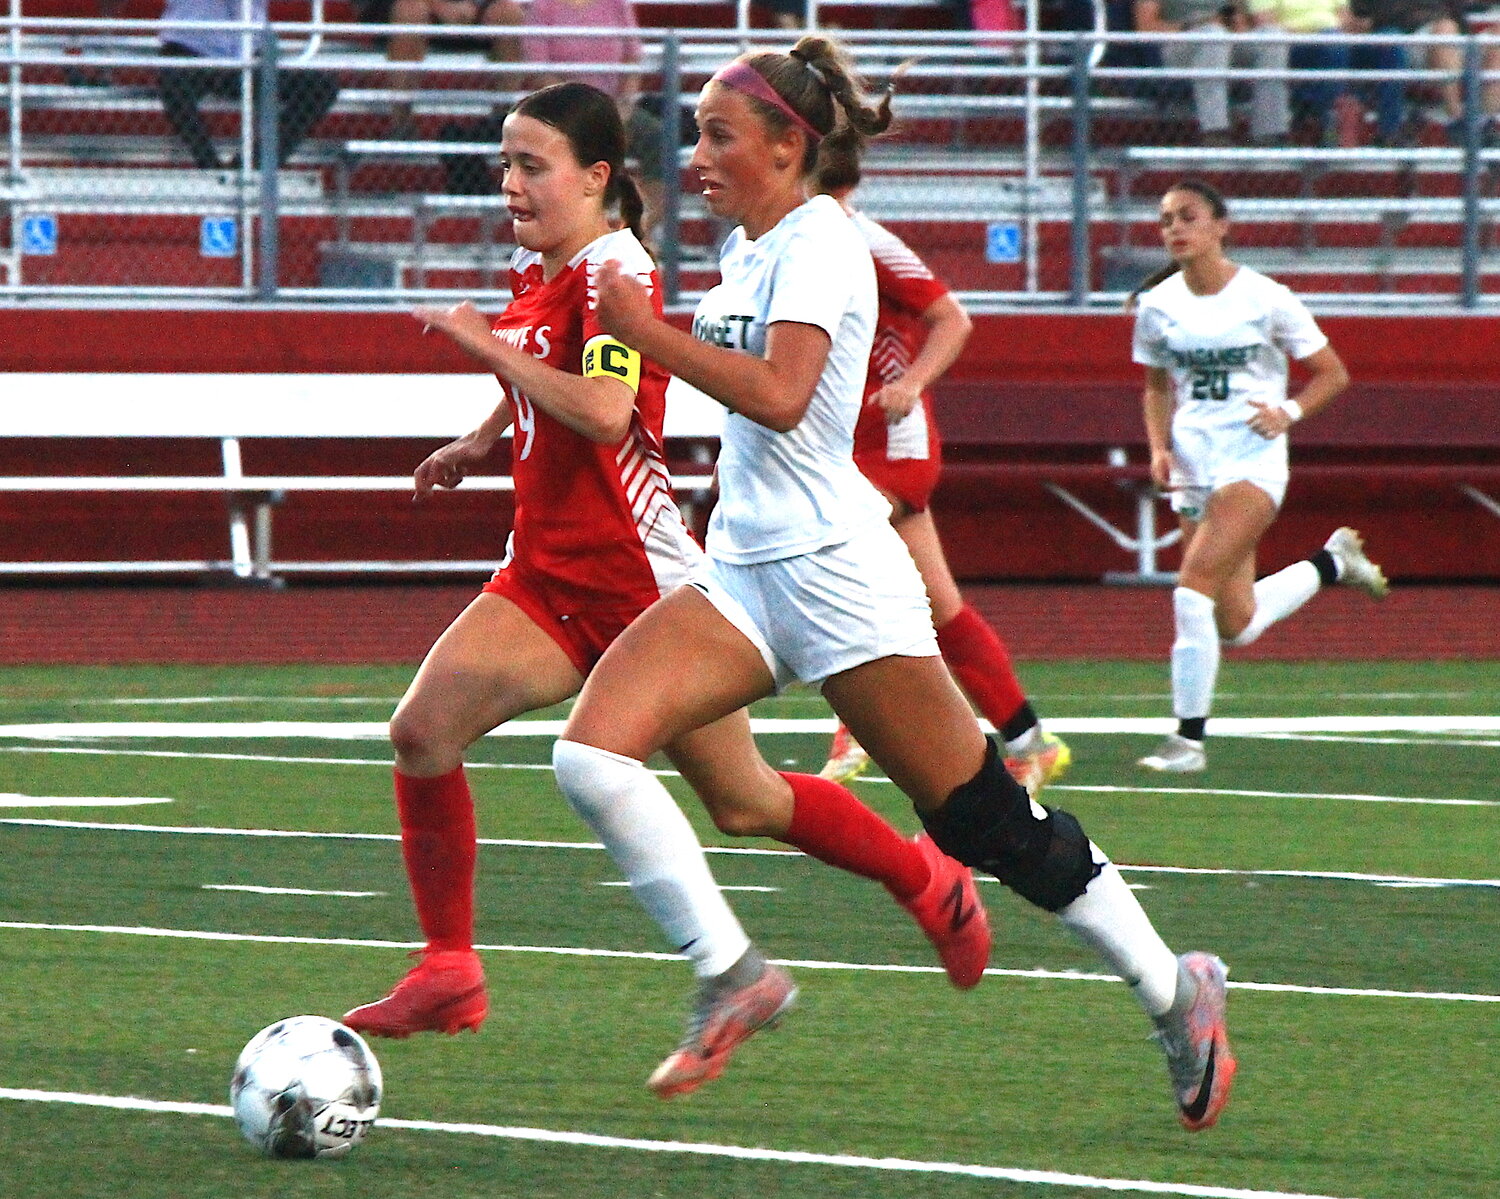 EPHS captain Eva Laroche (left) and a Ponaganset opponent chase down a free ball during the teams' Division II girls' soccer contest September 14 in city.